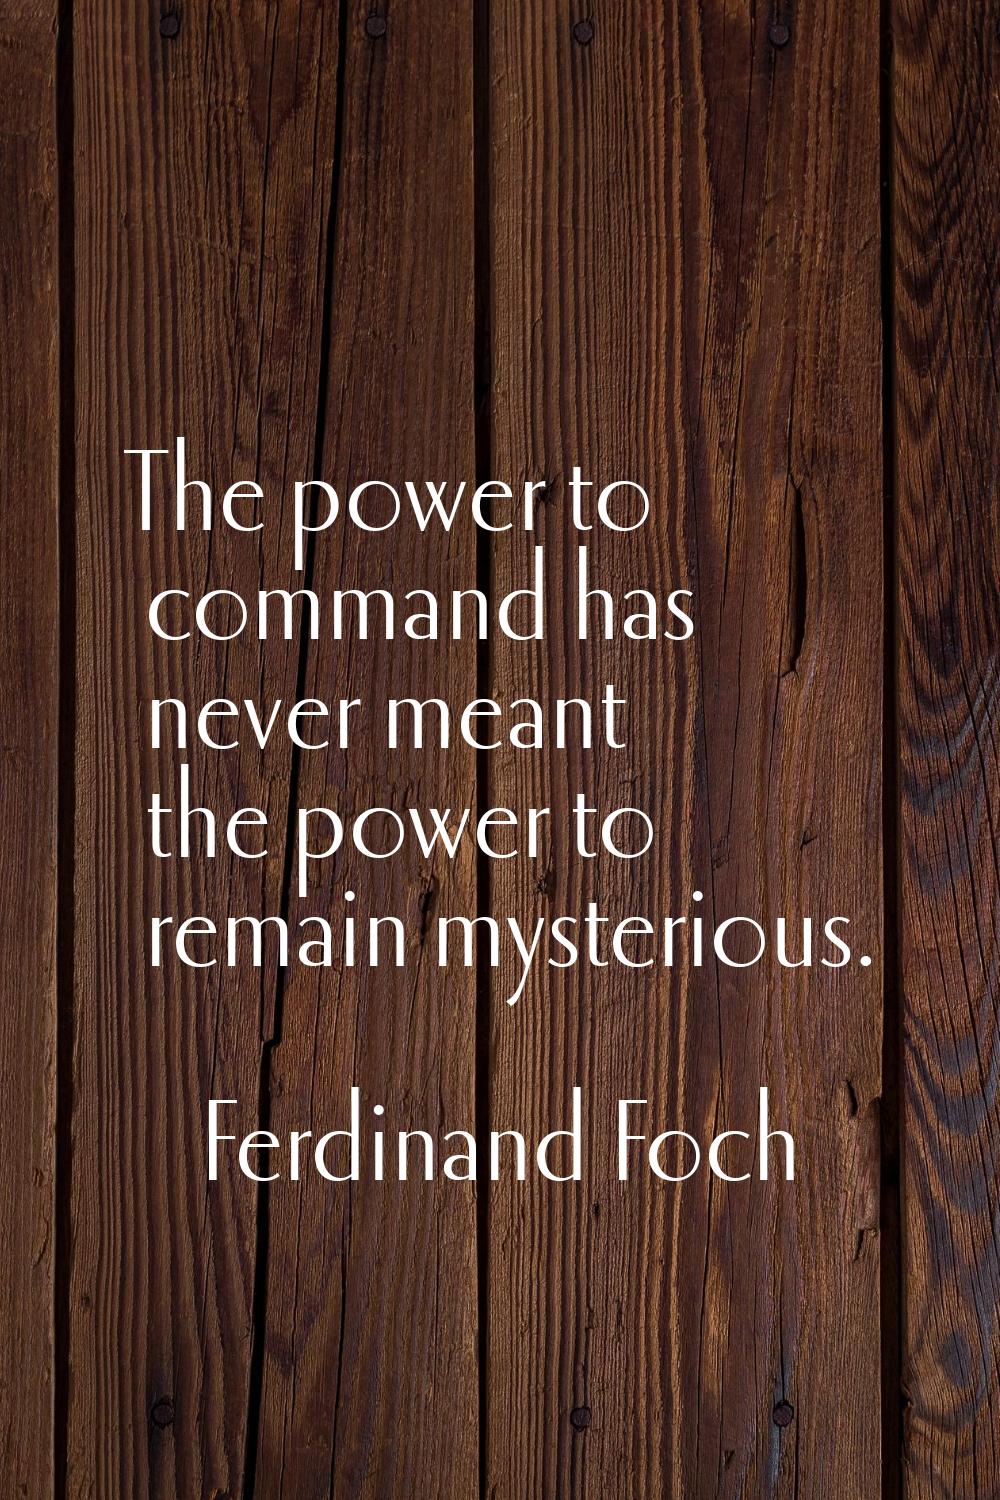 The power to command has never meant the power to remain mysterious.